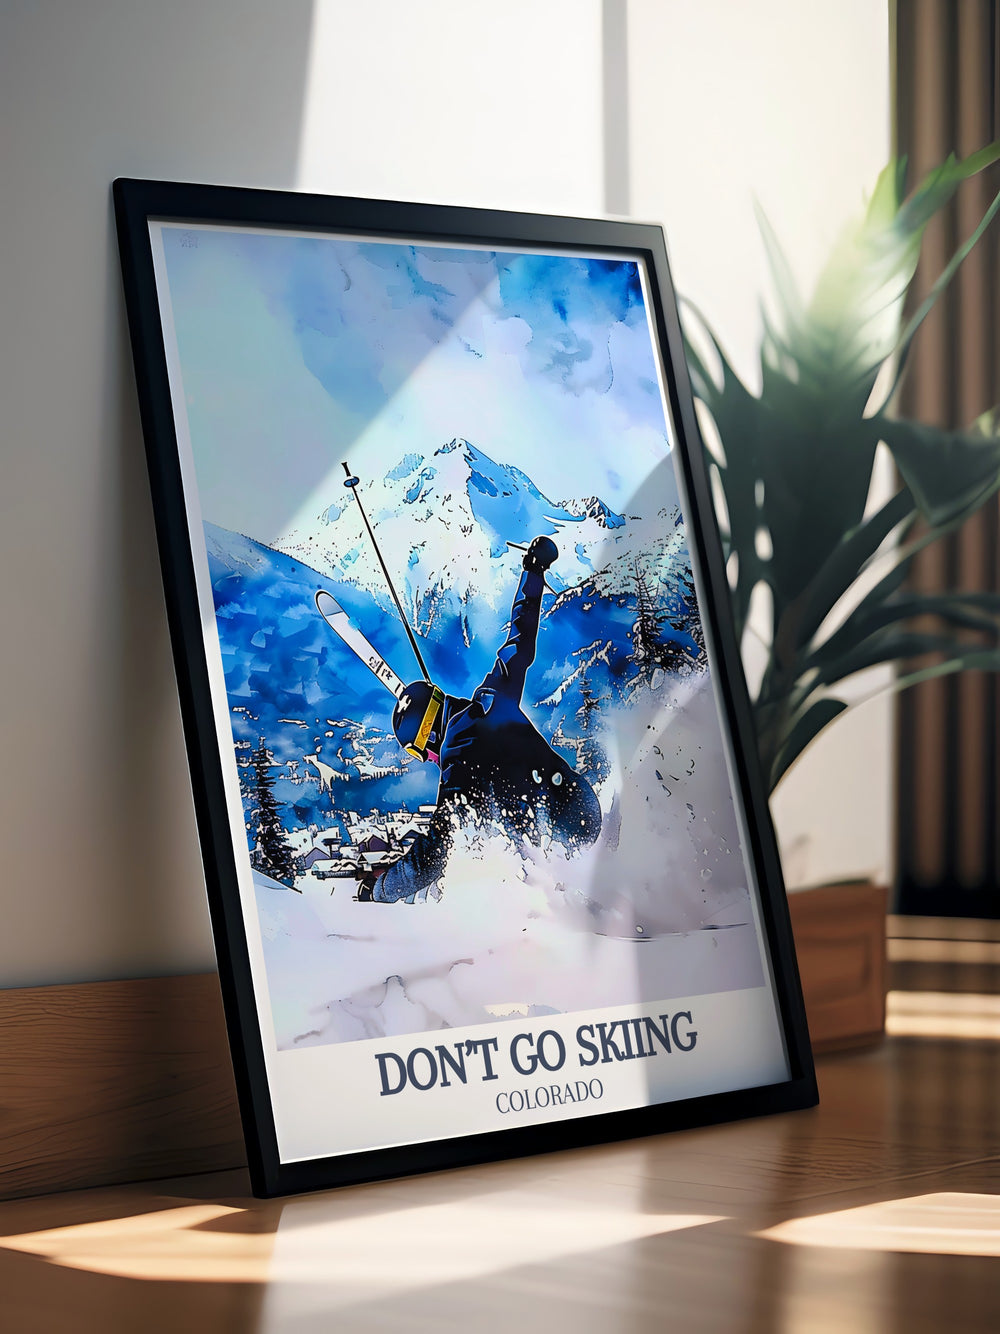 Stunning Aspen, Colorado, USA travel poster showcasing the vibrant ski resort scene. Ideal for any wall, this print brings the excitement of the slopes to life. A great addition to any skiing and snowboarding art collection, adding a touch of adventure to your home.